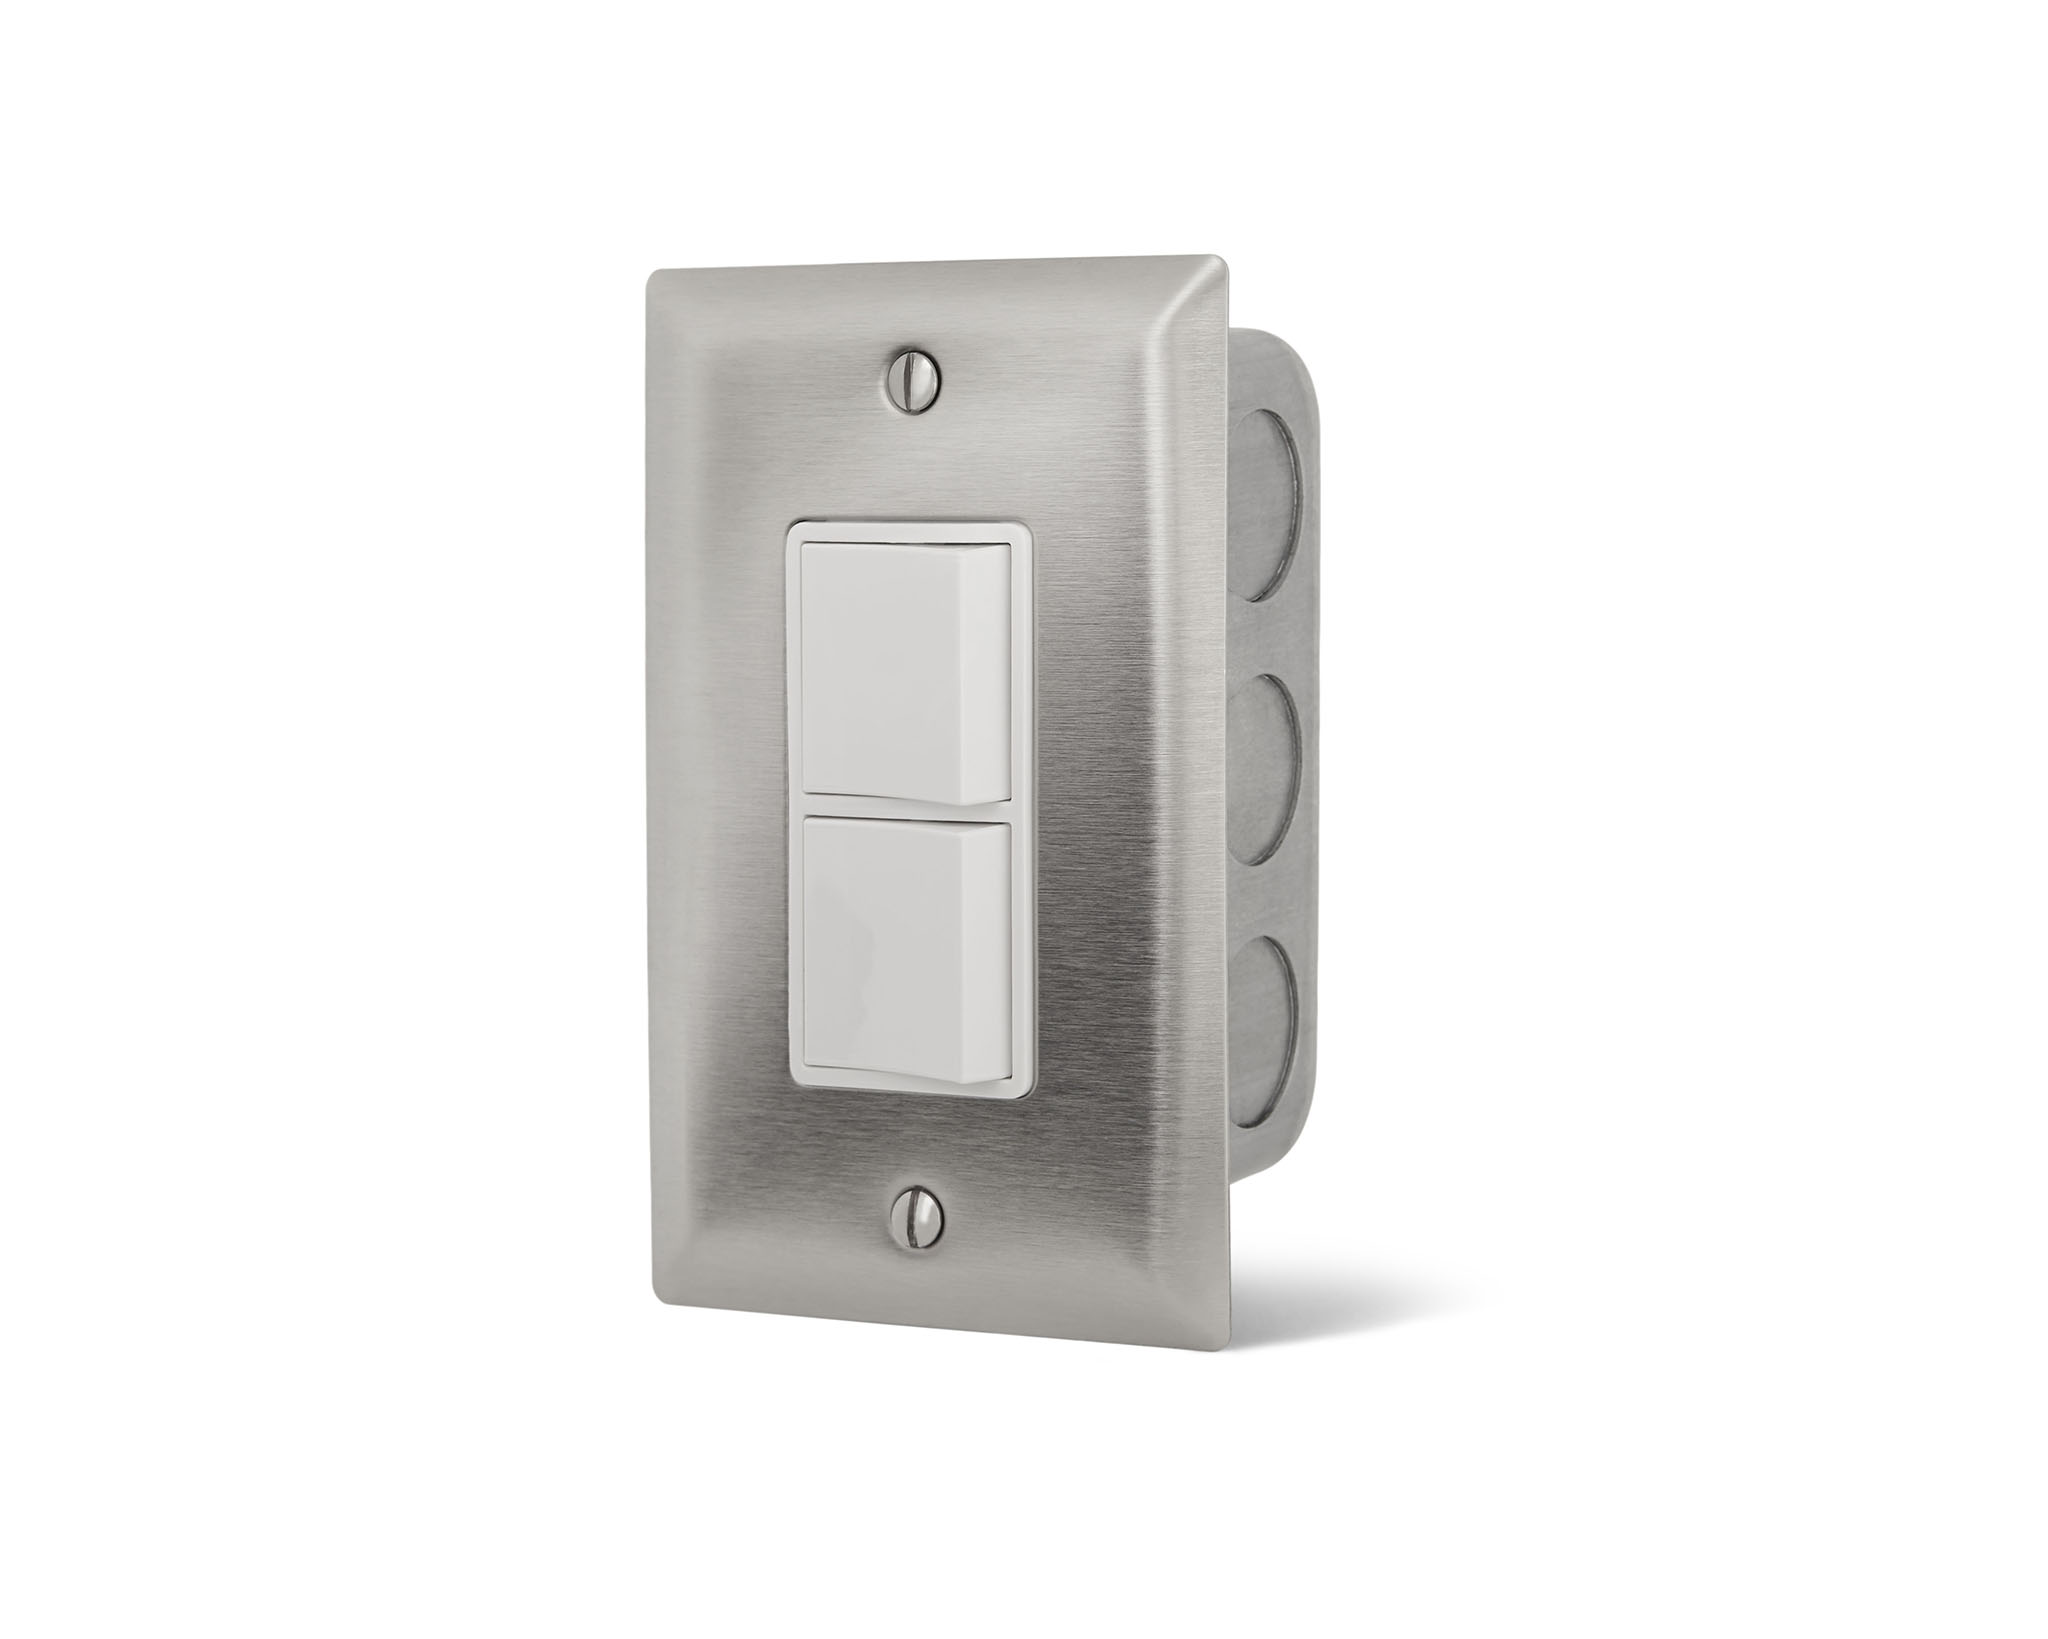 Infratech 14-4300 Single Stainless Steel Wall Plate with Gang Box